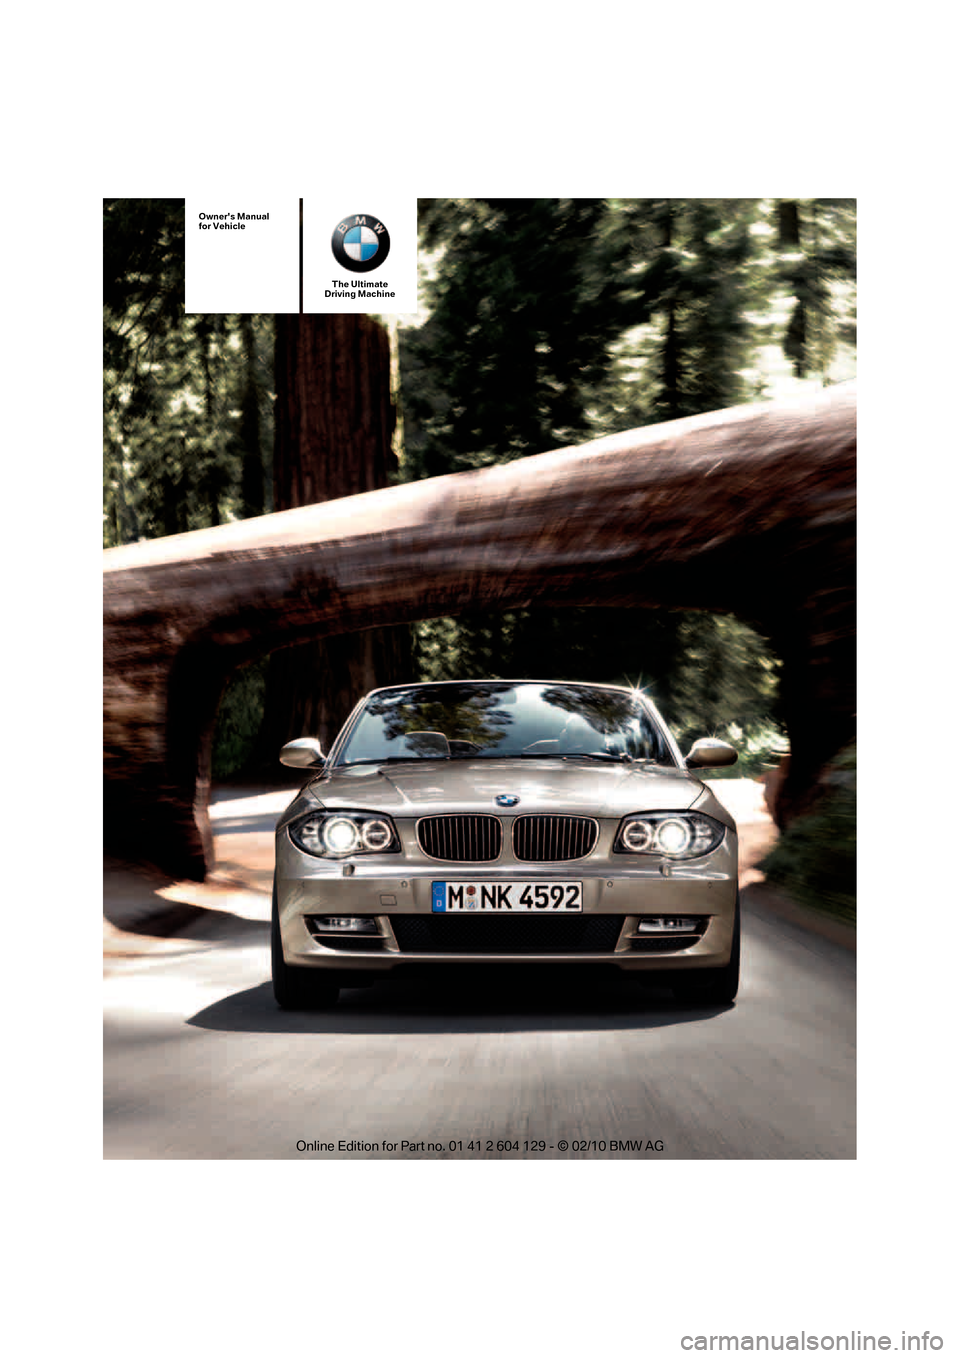 BMW 135I COUPE 2011 E82 Owners Manual The Ultimate
Driving Machine
Owners Manual
for Vehicle 